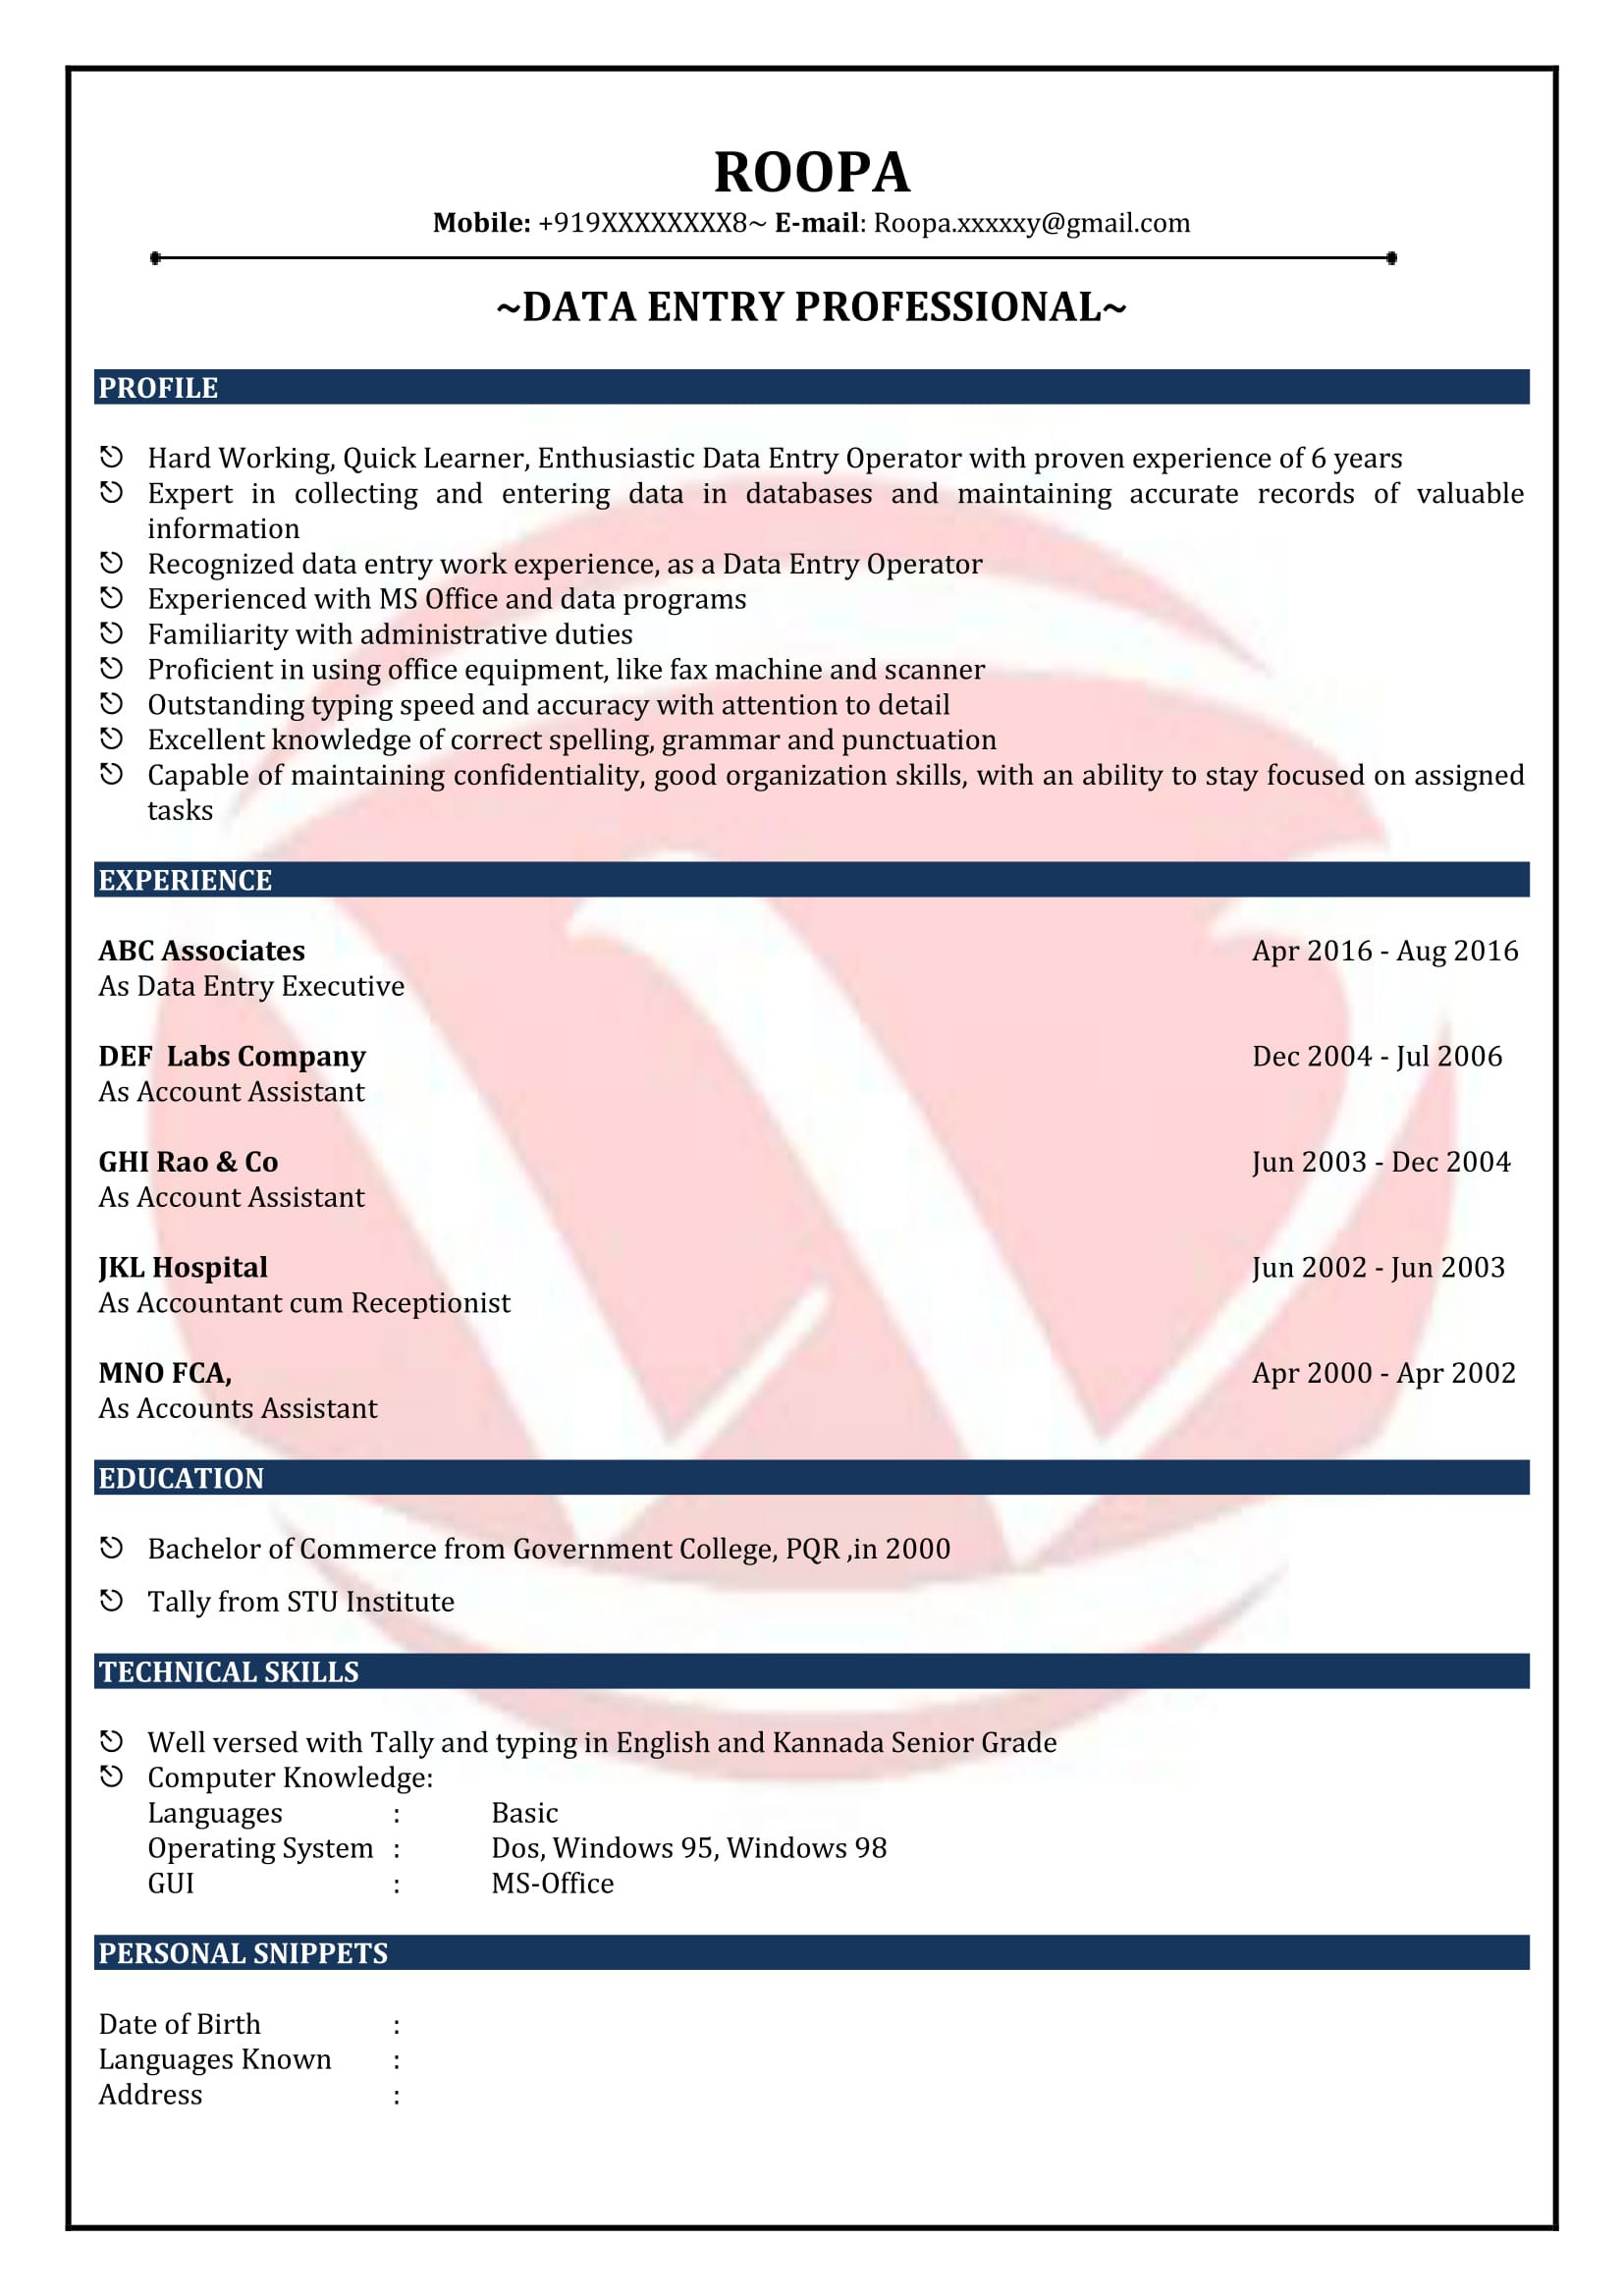 Resume Samples for Data Entry Positions Data Entry Sample Resumes, Download Resume format Templates!